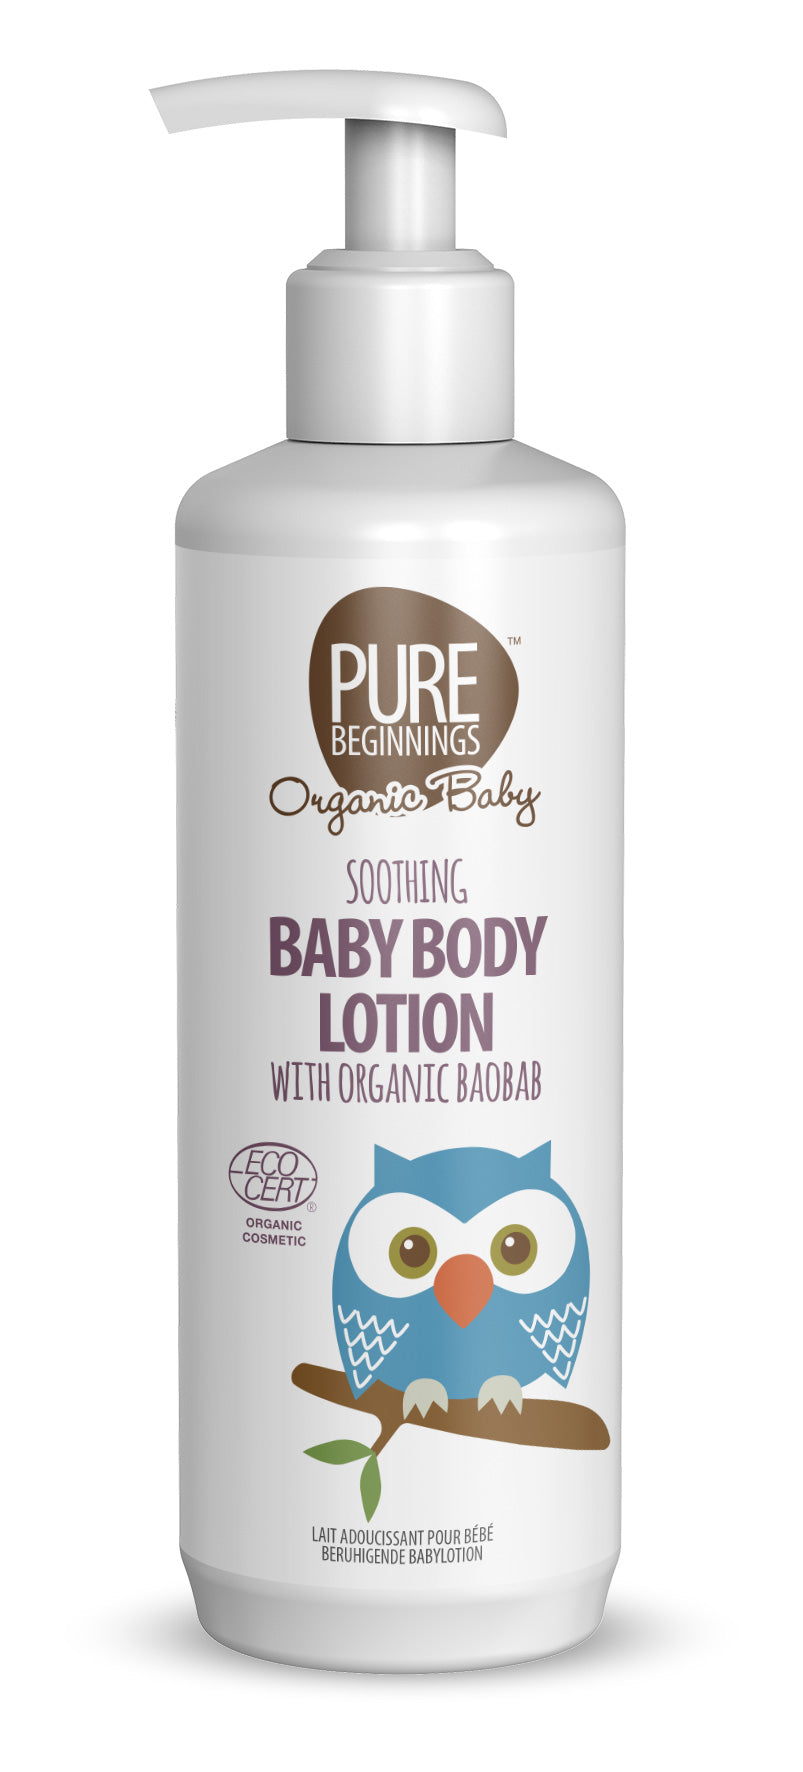 Soothing Baby Body Lotion